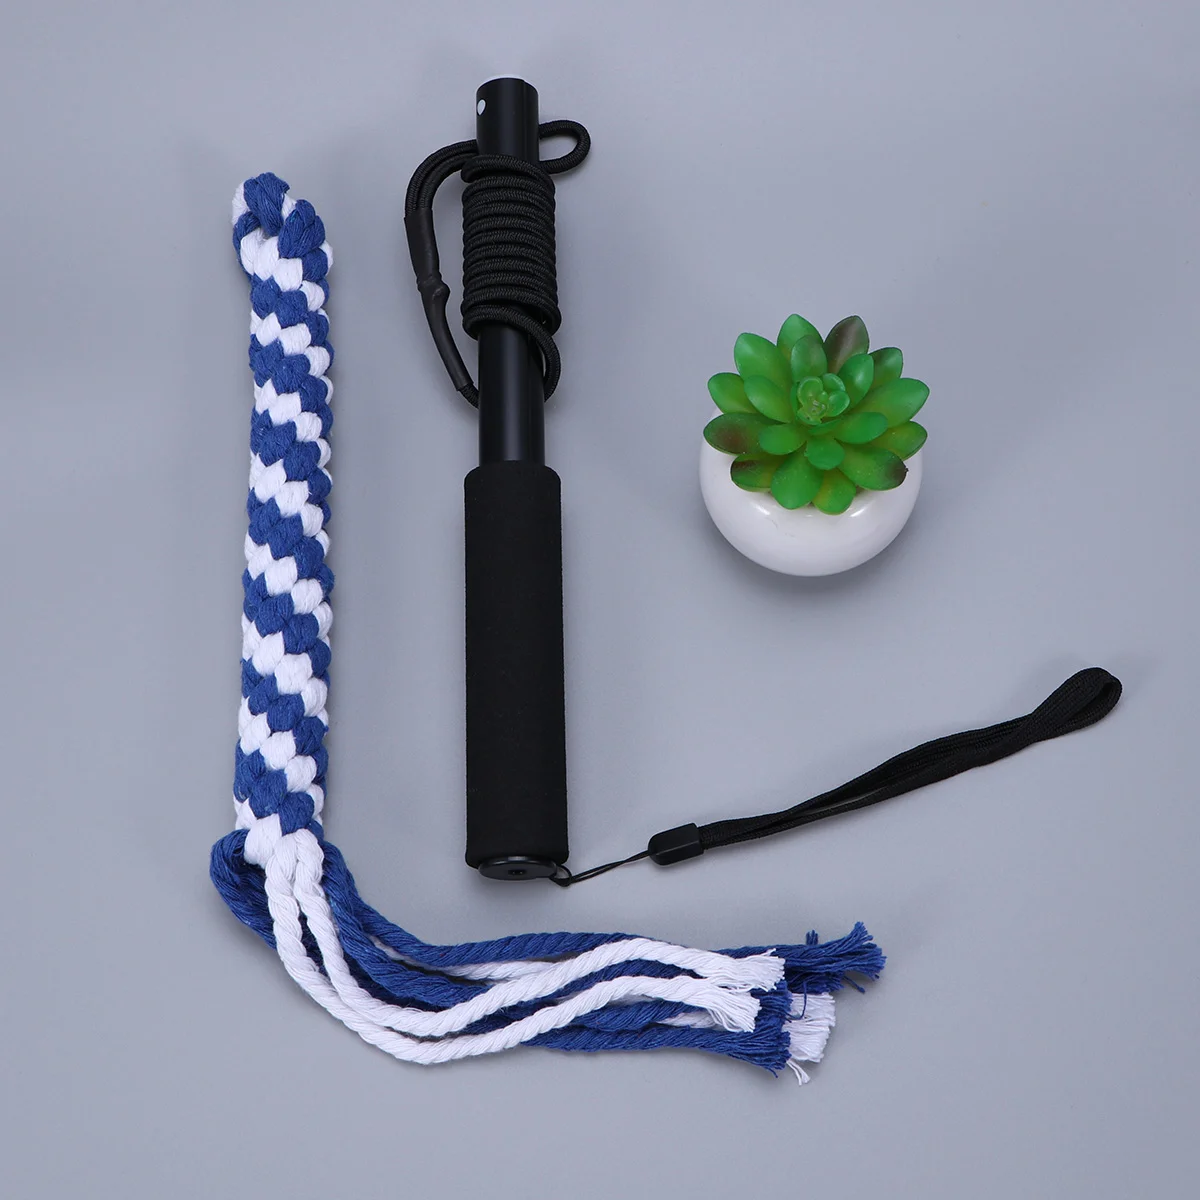 

Interactive Tug, Extendable Teaser Wand Outdoor Playing for Pulling, Chasing, Chewing, Teasing, Training Dog toys Flirt pole